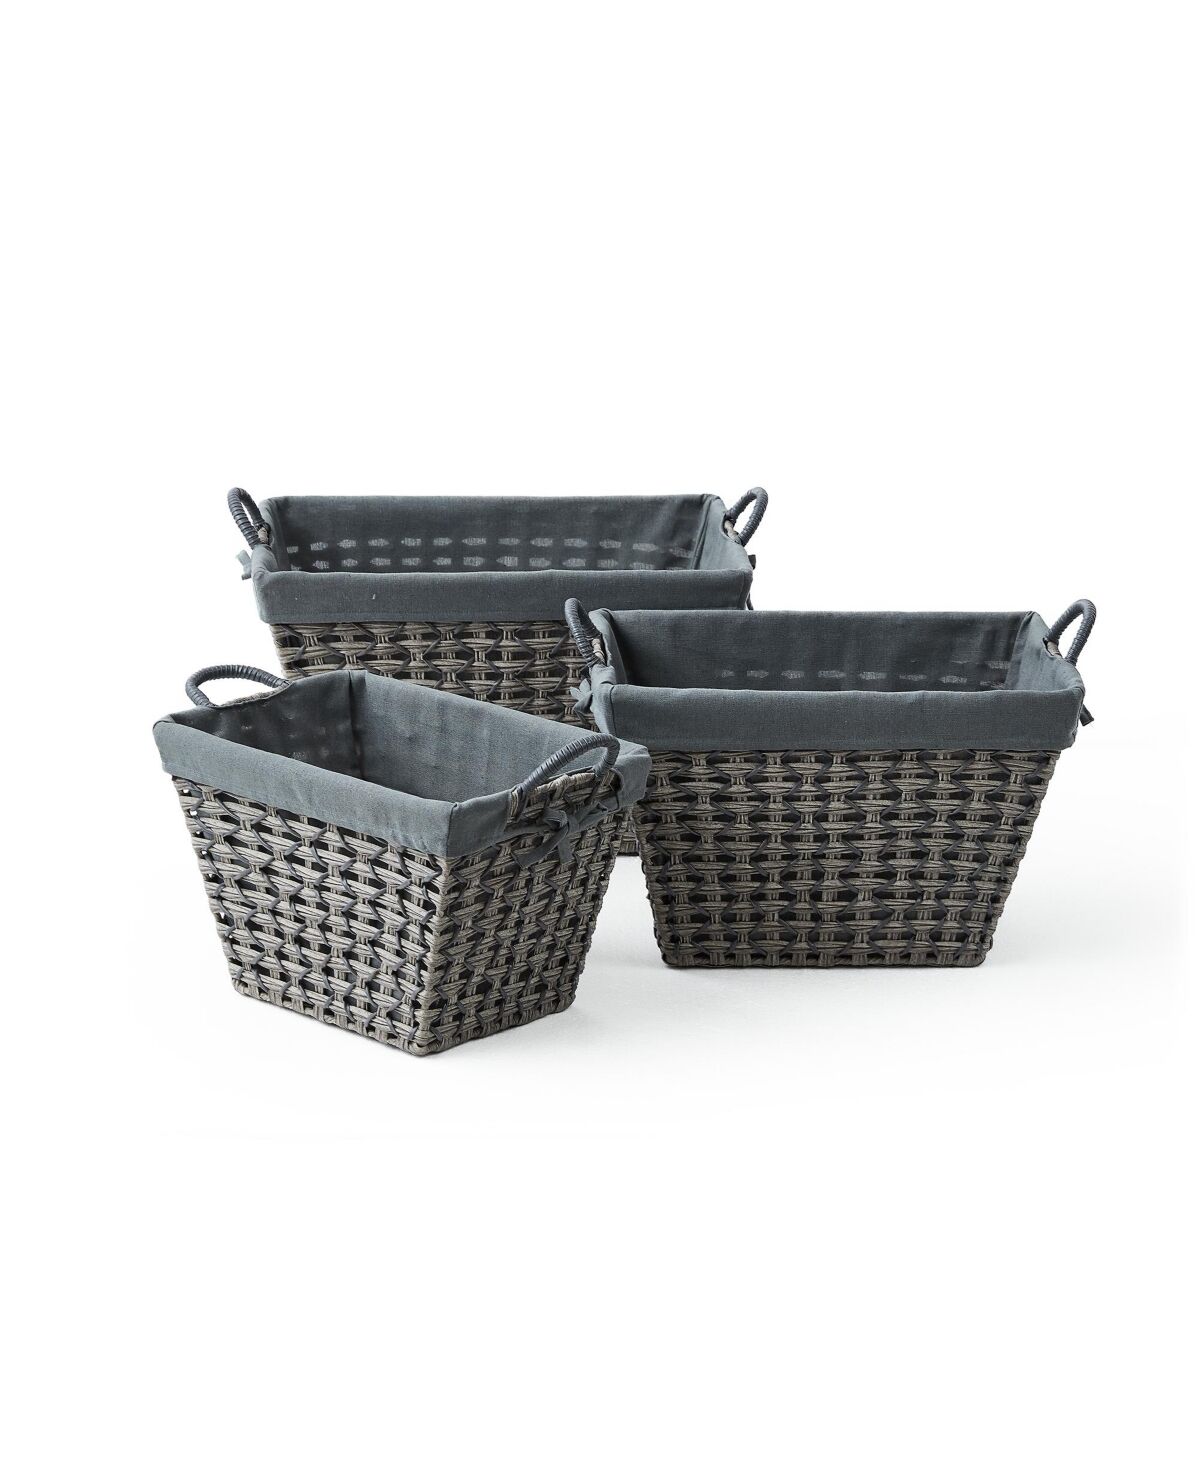 Baumatic 3 Piece Tapered Rectangular Storage Set in Open Weave with Ear Handles and Overlap Lift-Off Liner - Gray